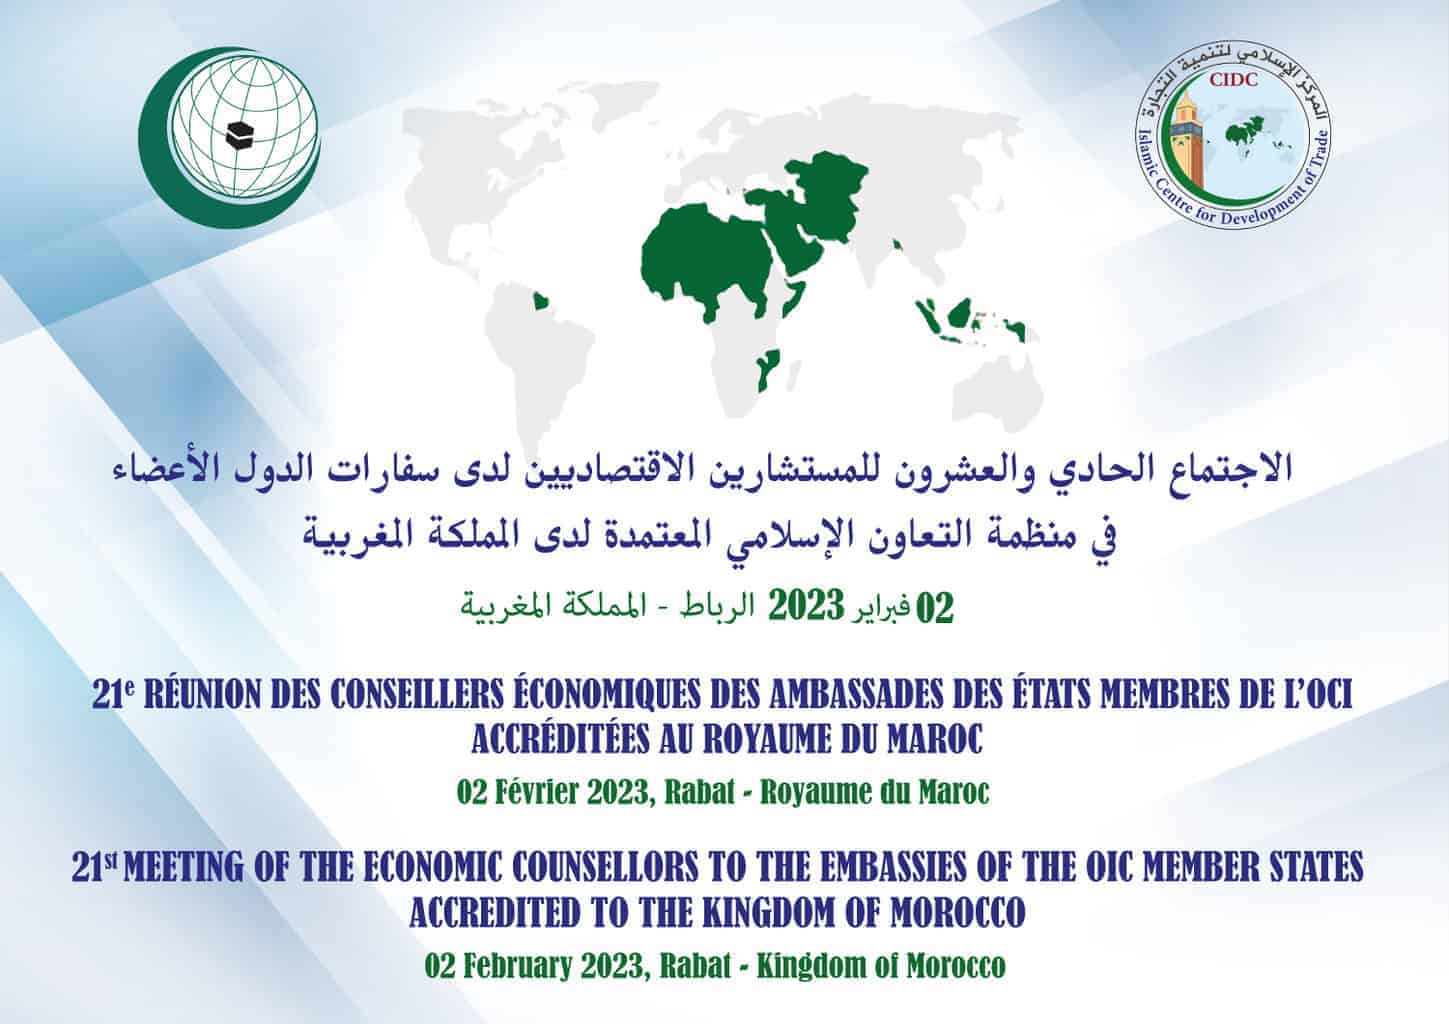 21st Meeting of Economic Advisers to Embassies of OIC Member States accredited to the Kingdom of Morocco